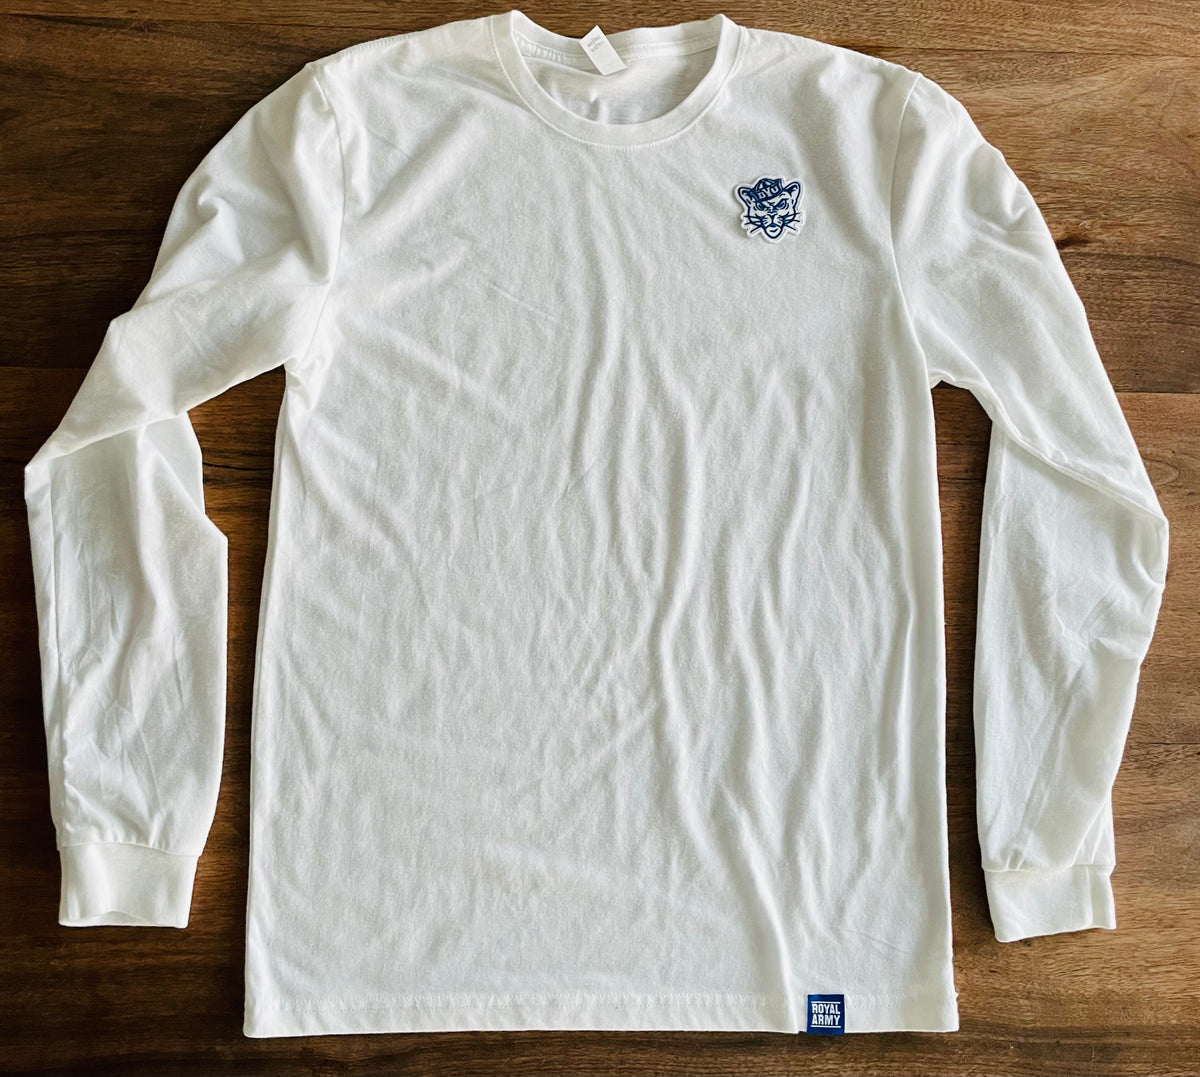 Long-sleeve White T-shirt with Mini BYU Sailor Cougar Patch